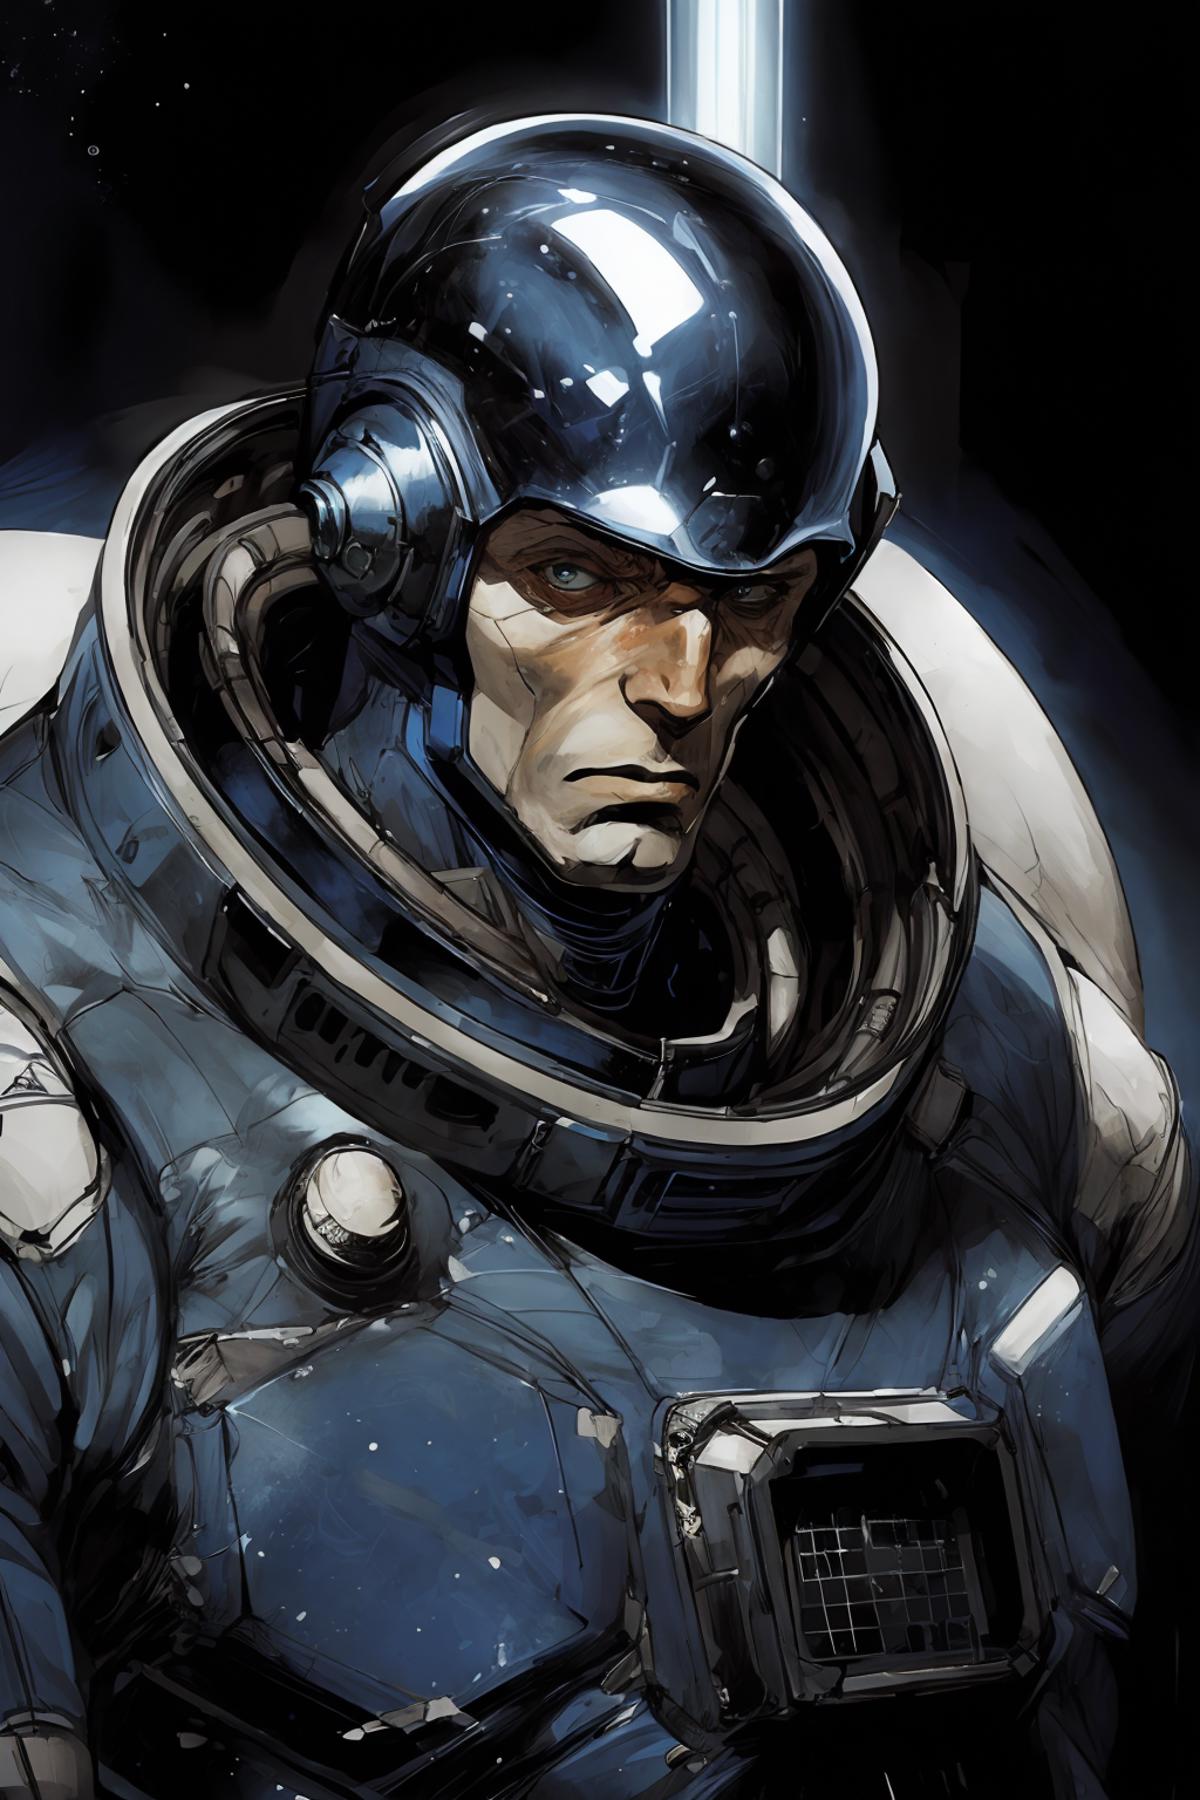 A Superhero with a Blue Suit and Helmet with a Star on the Chest.